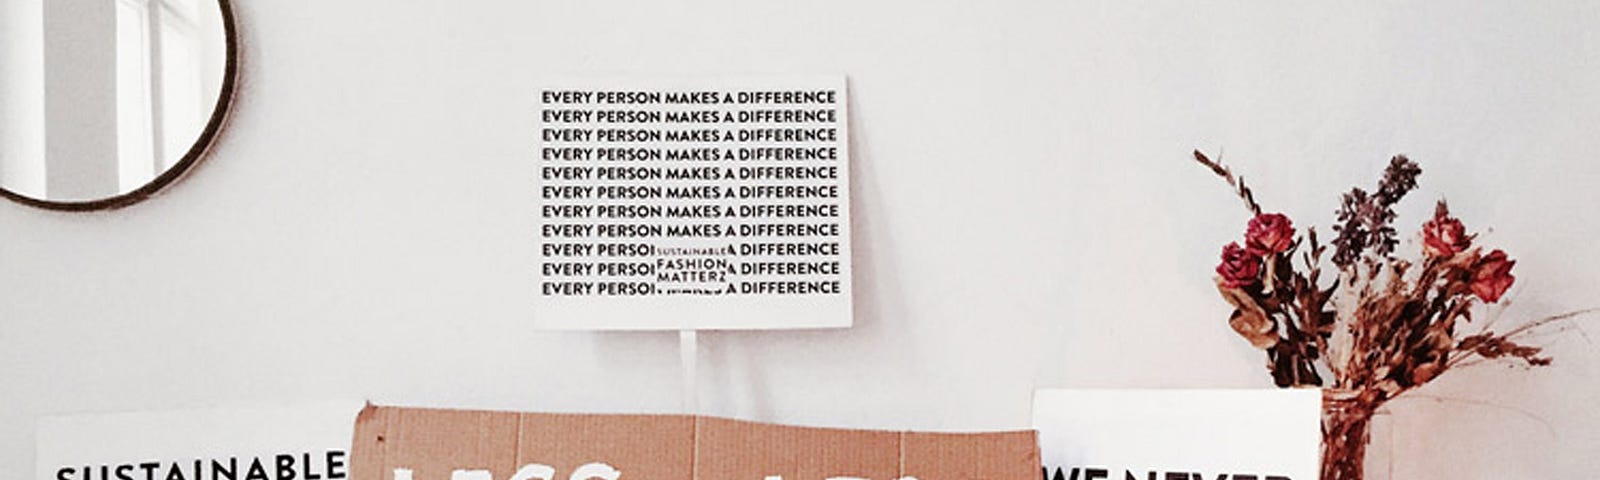 sustainability posters in a white bedroom